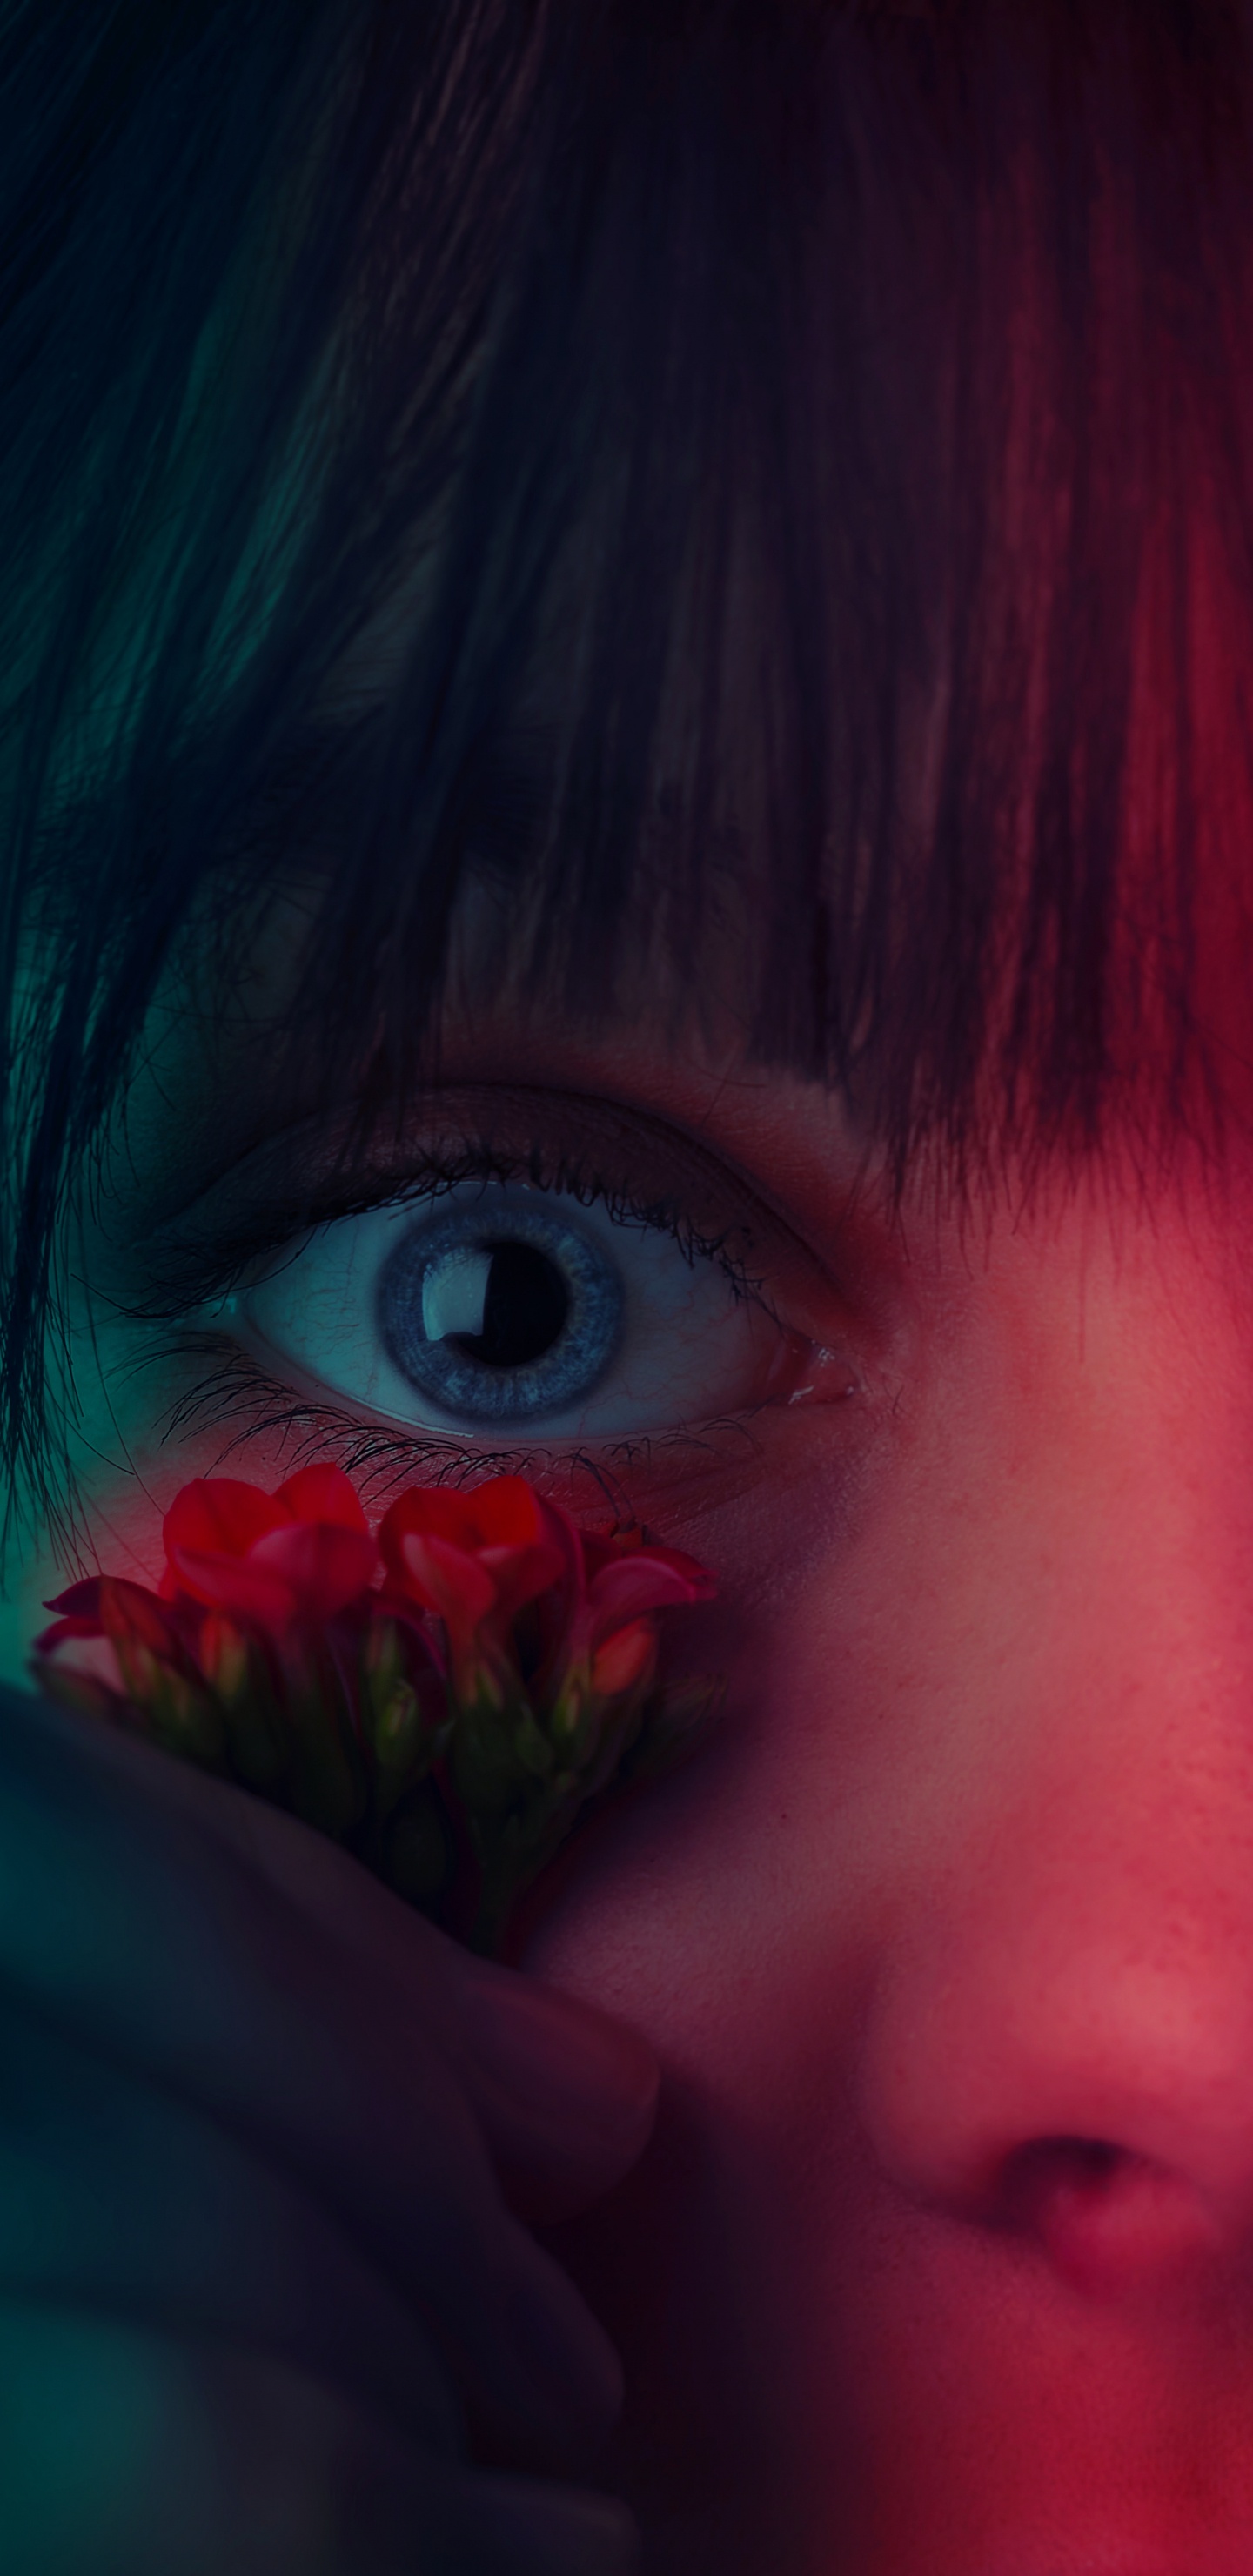 Girl With Red Flower on Her Face. Wallpaper in 1440x2960 Resolution